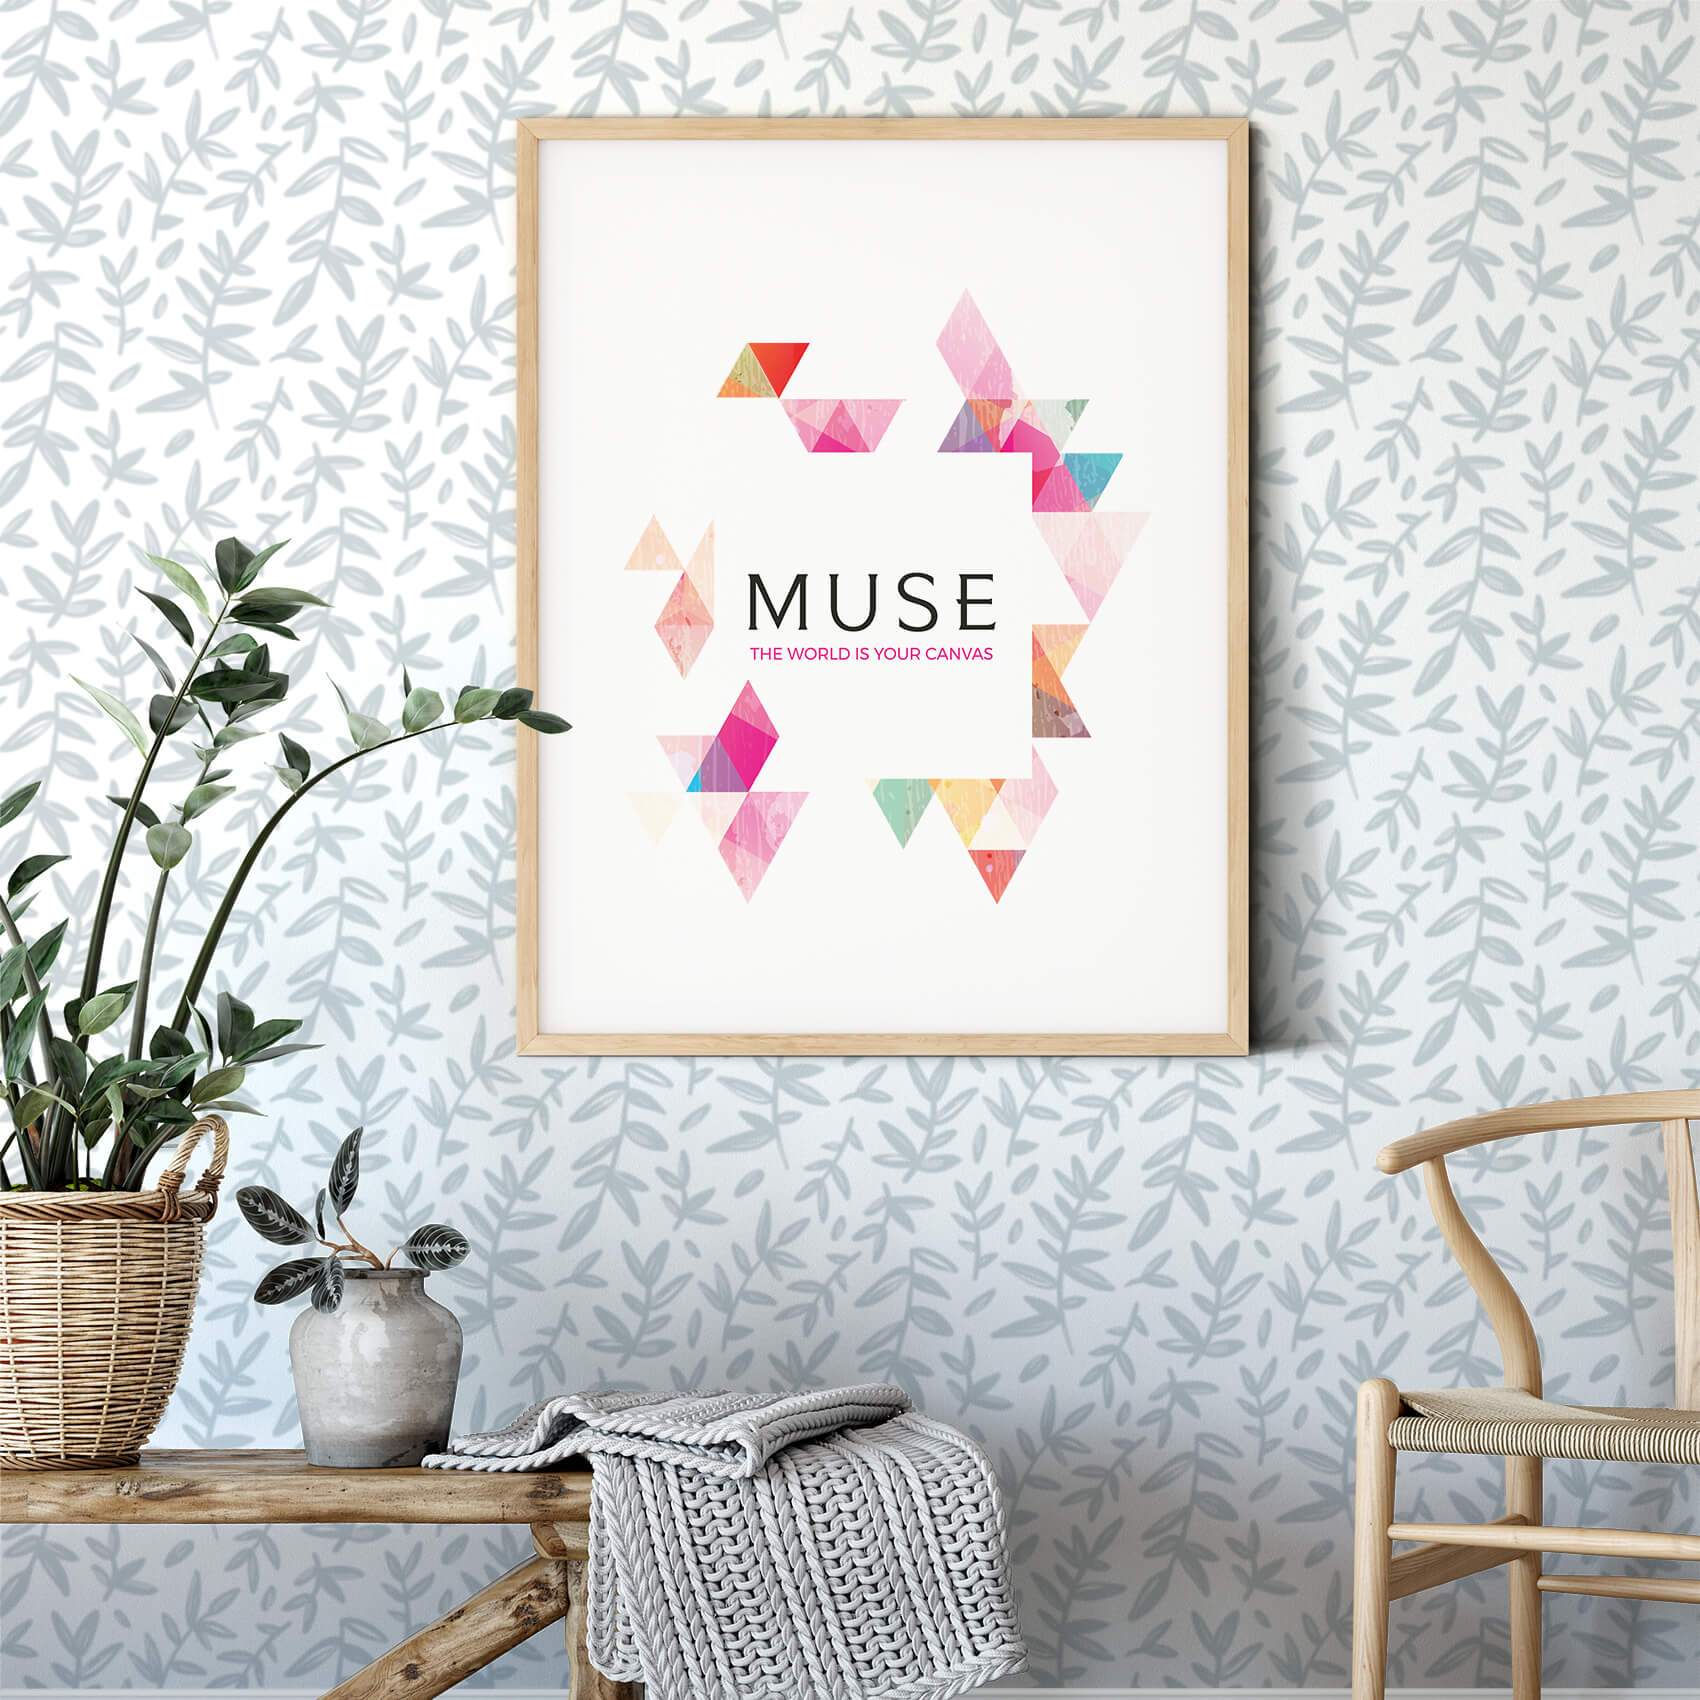 MUSE Wall Studio Leaf Branches